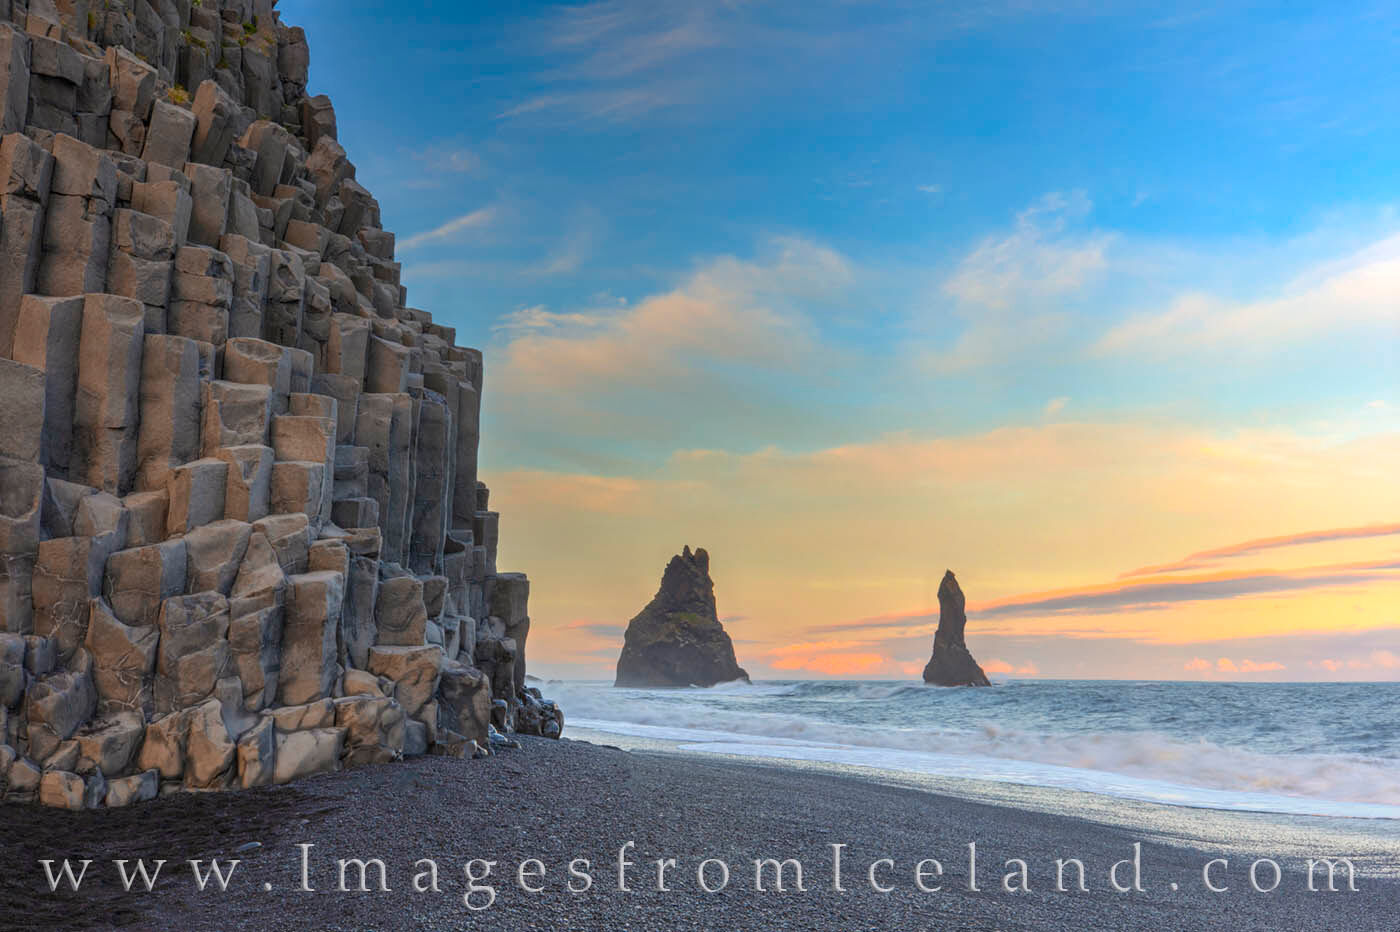 Beneath the soft light of the midnight sun, the skies above Reynisfjara Beach in south Iceland were colorful and calm. Along...